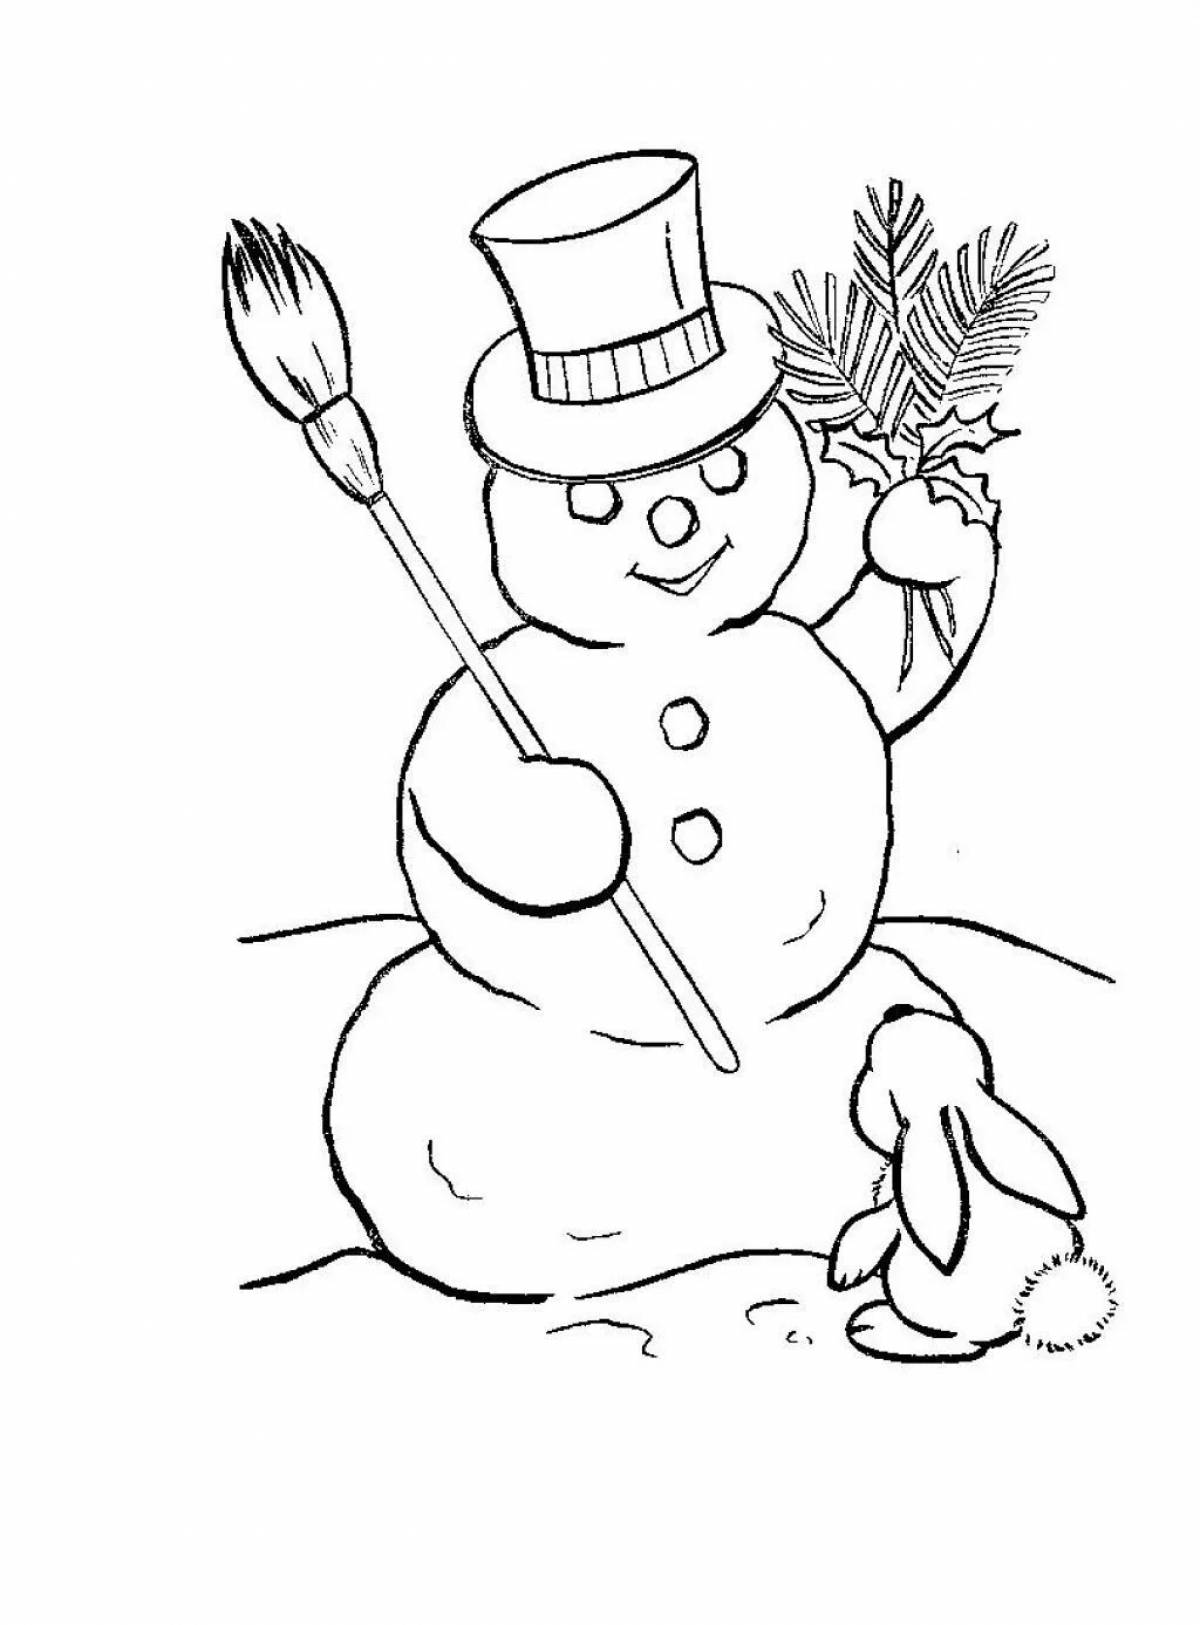 Amazing funny snowman coloring book for kids